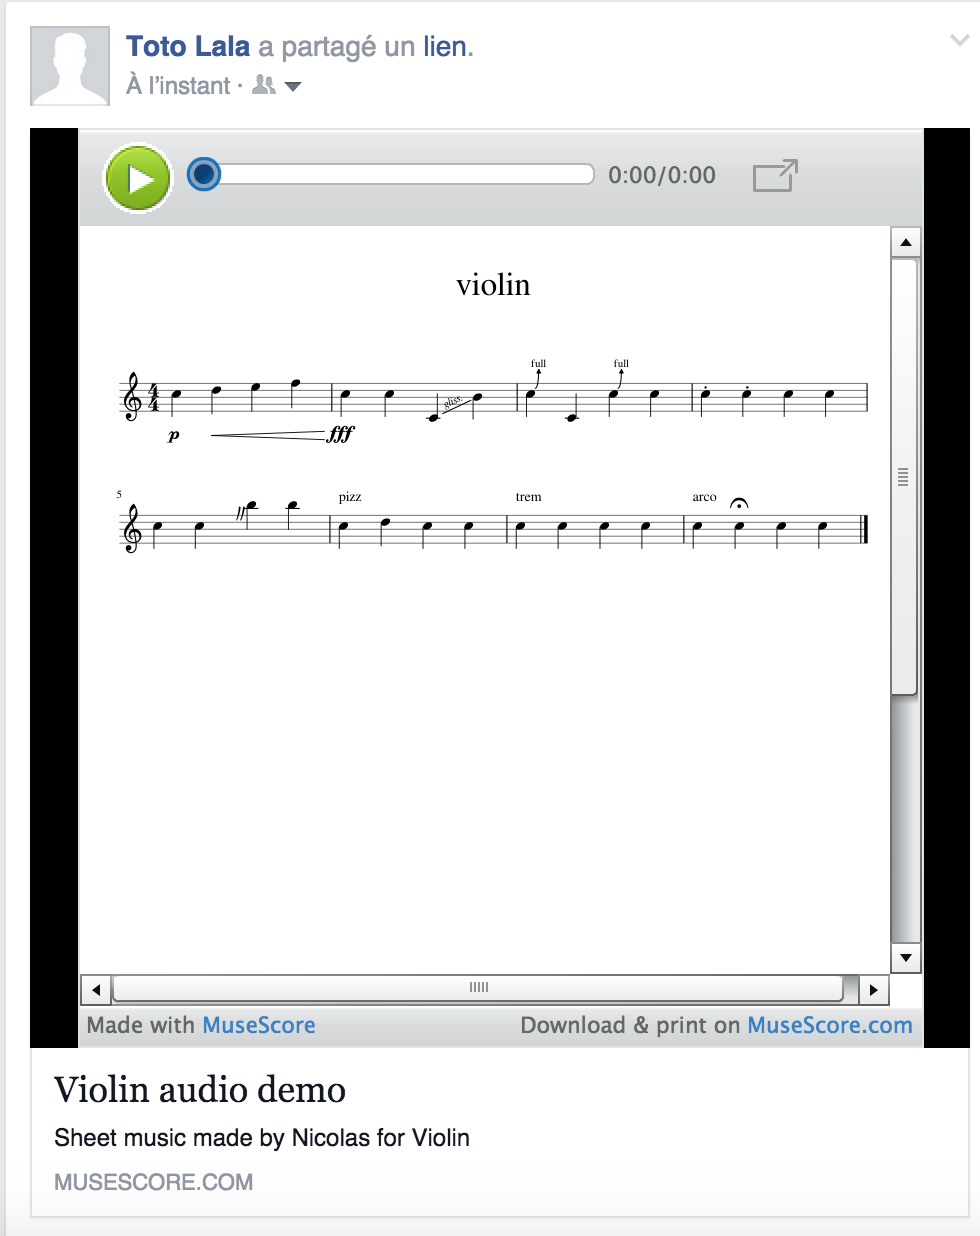 Globally Move Fingering Musescore